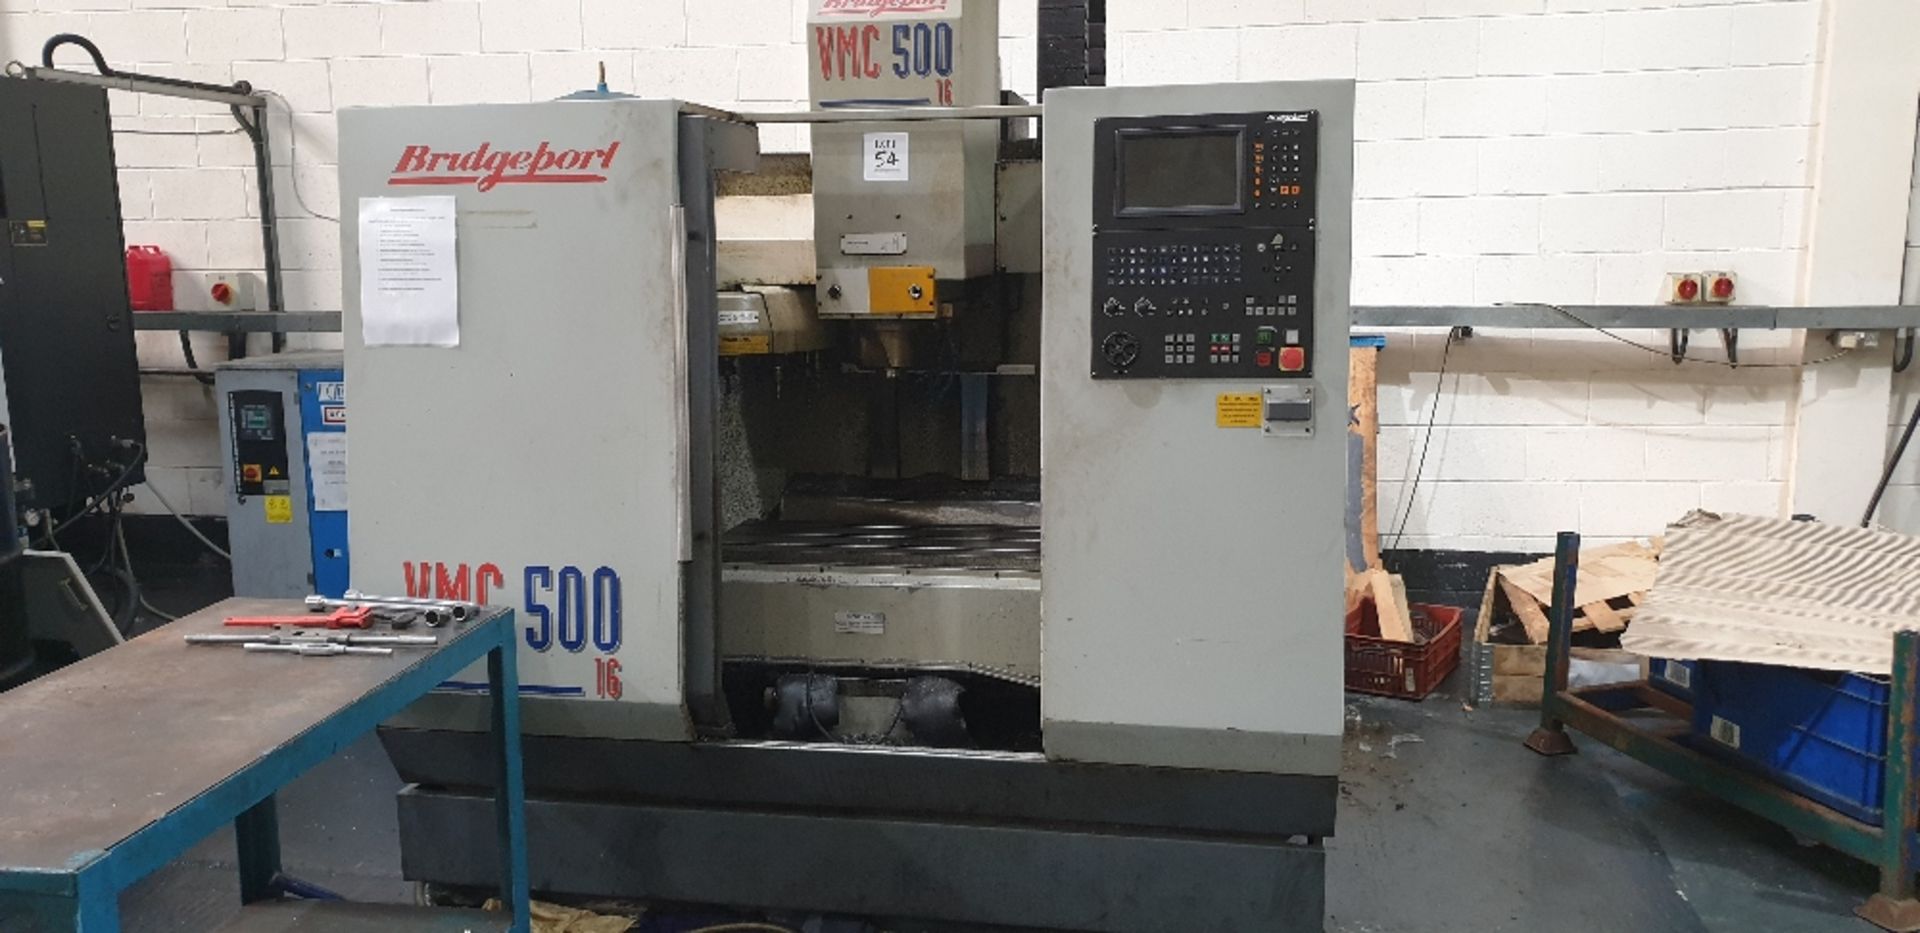 Bridgeport VMC 500/16 vertical machining centre Serial No. 721093, year of manufacture 1997 with 3 -